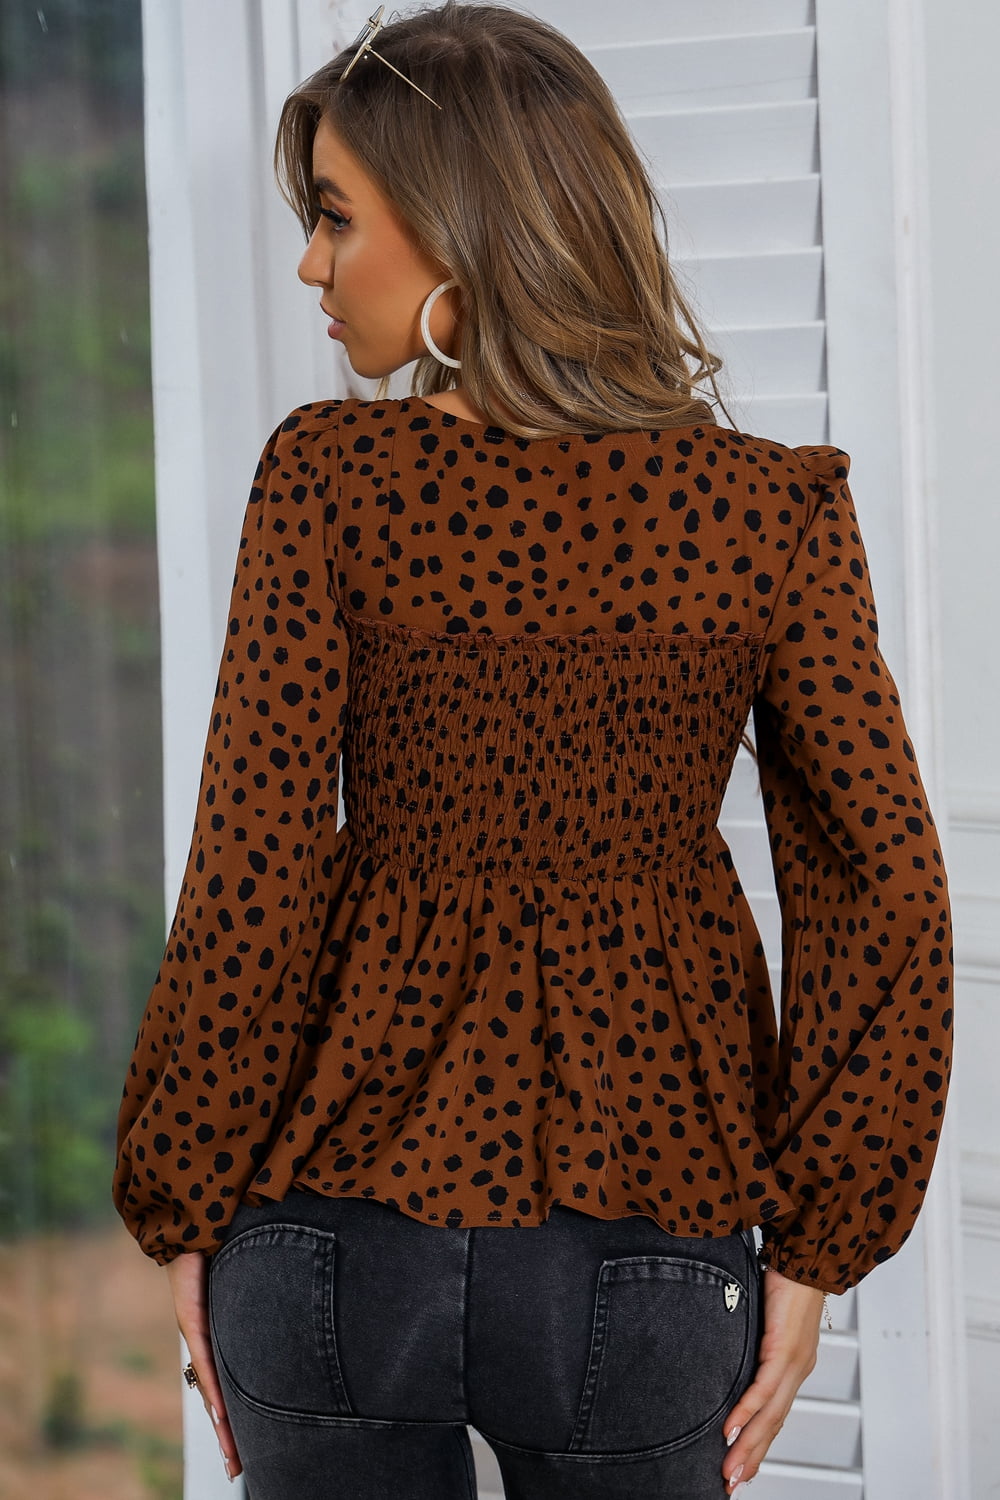 Square Neck Long Sleeve Smocked Blouse - Women’s Clothing & Accessories - Shirts & Tops - 8 - 2024